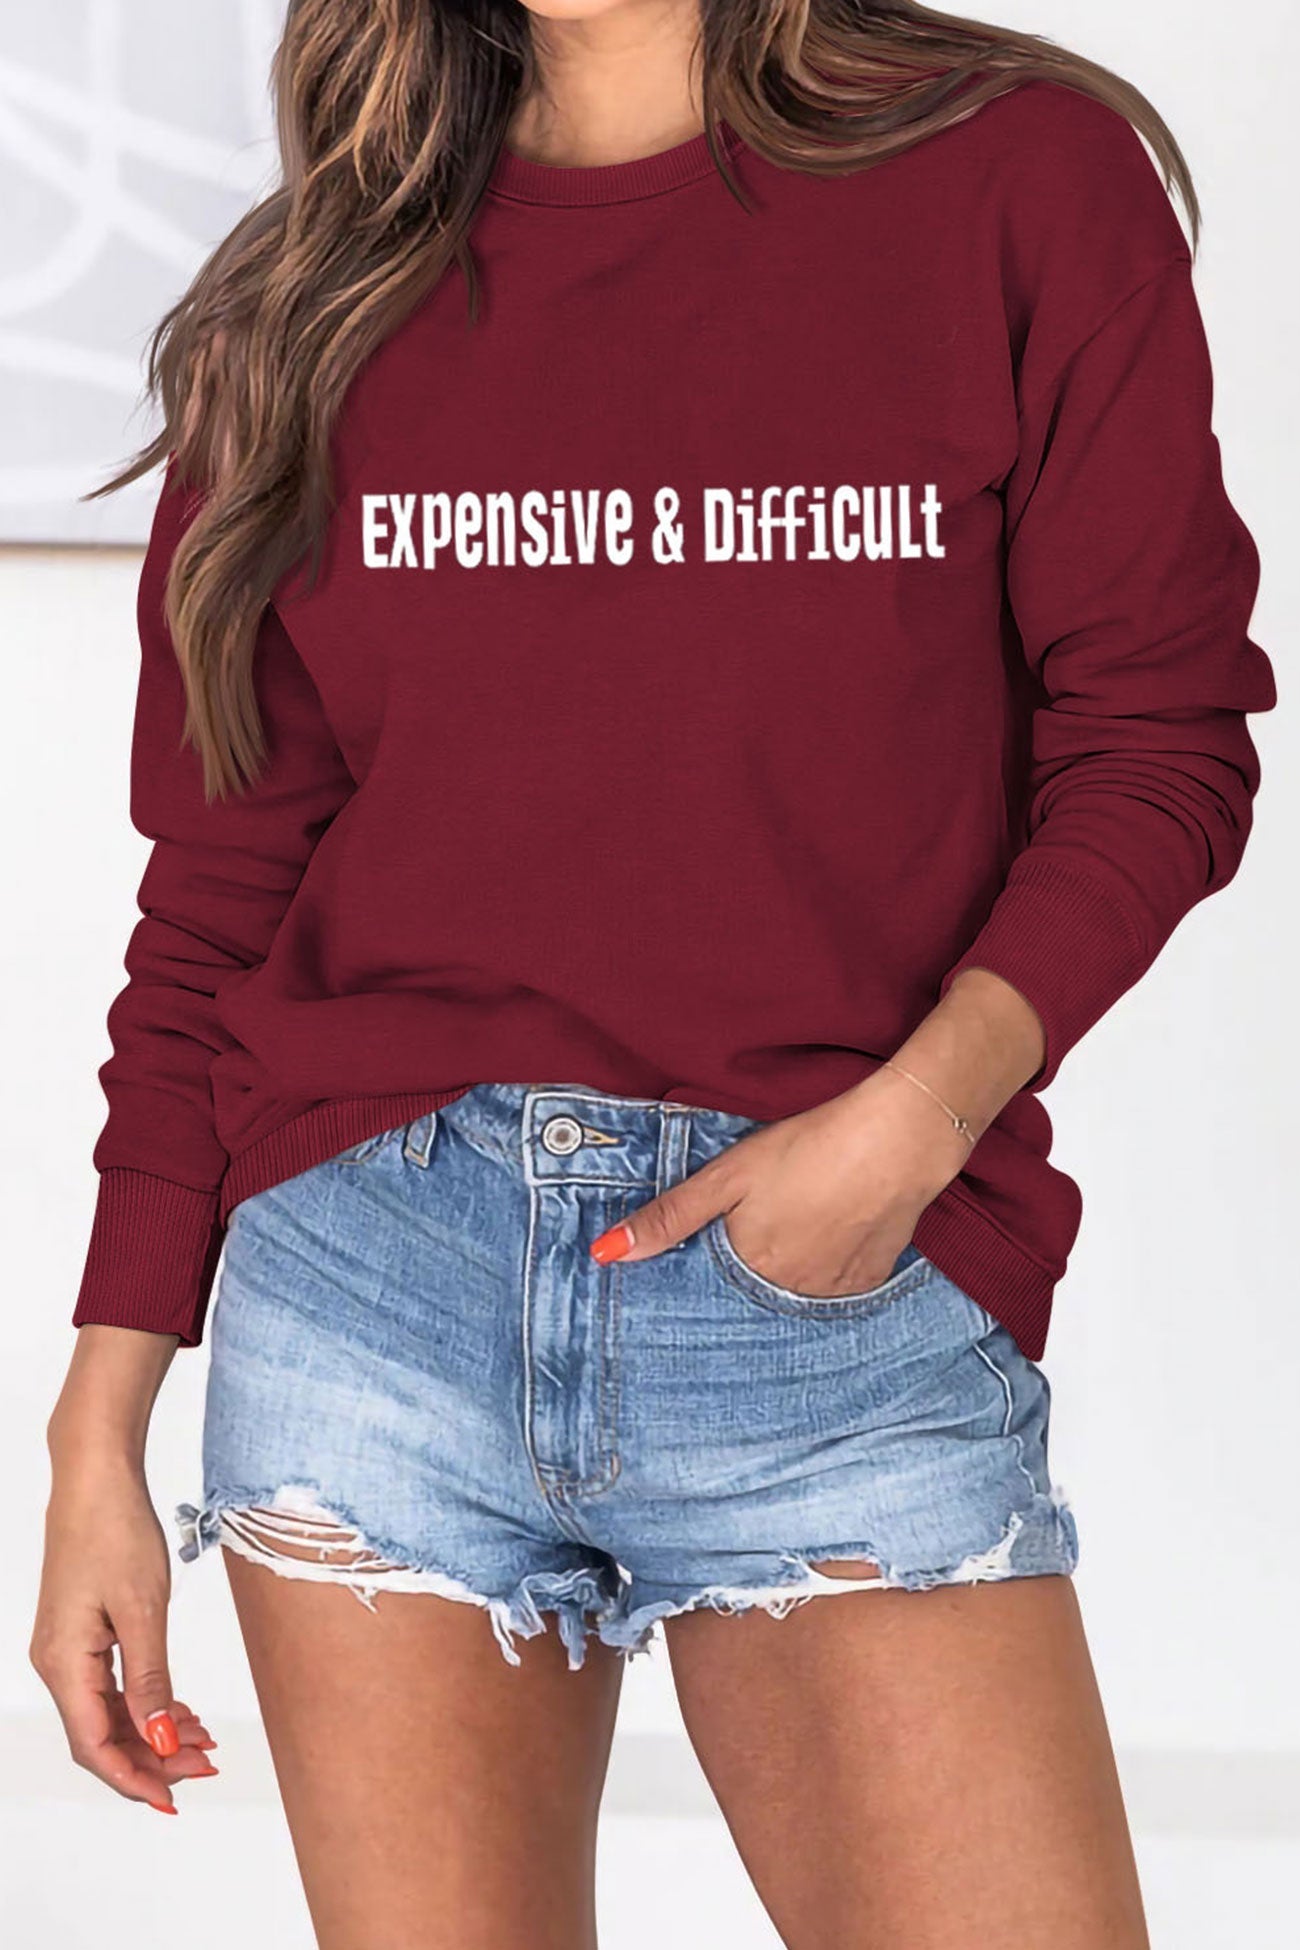 Expensive & Difficult Printed Sweatshirt